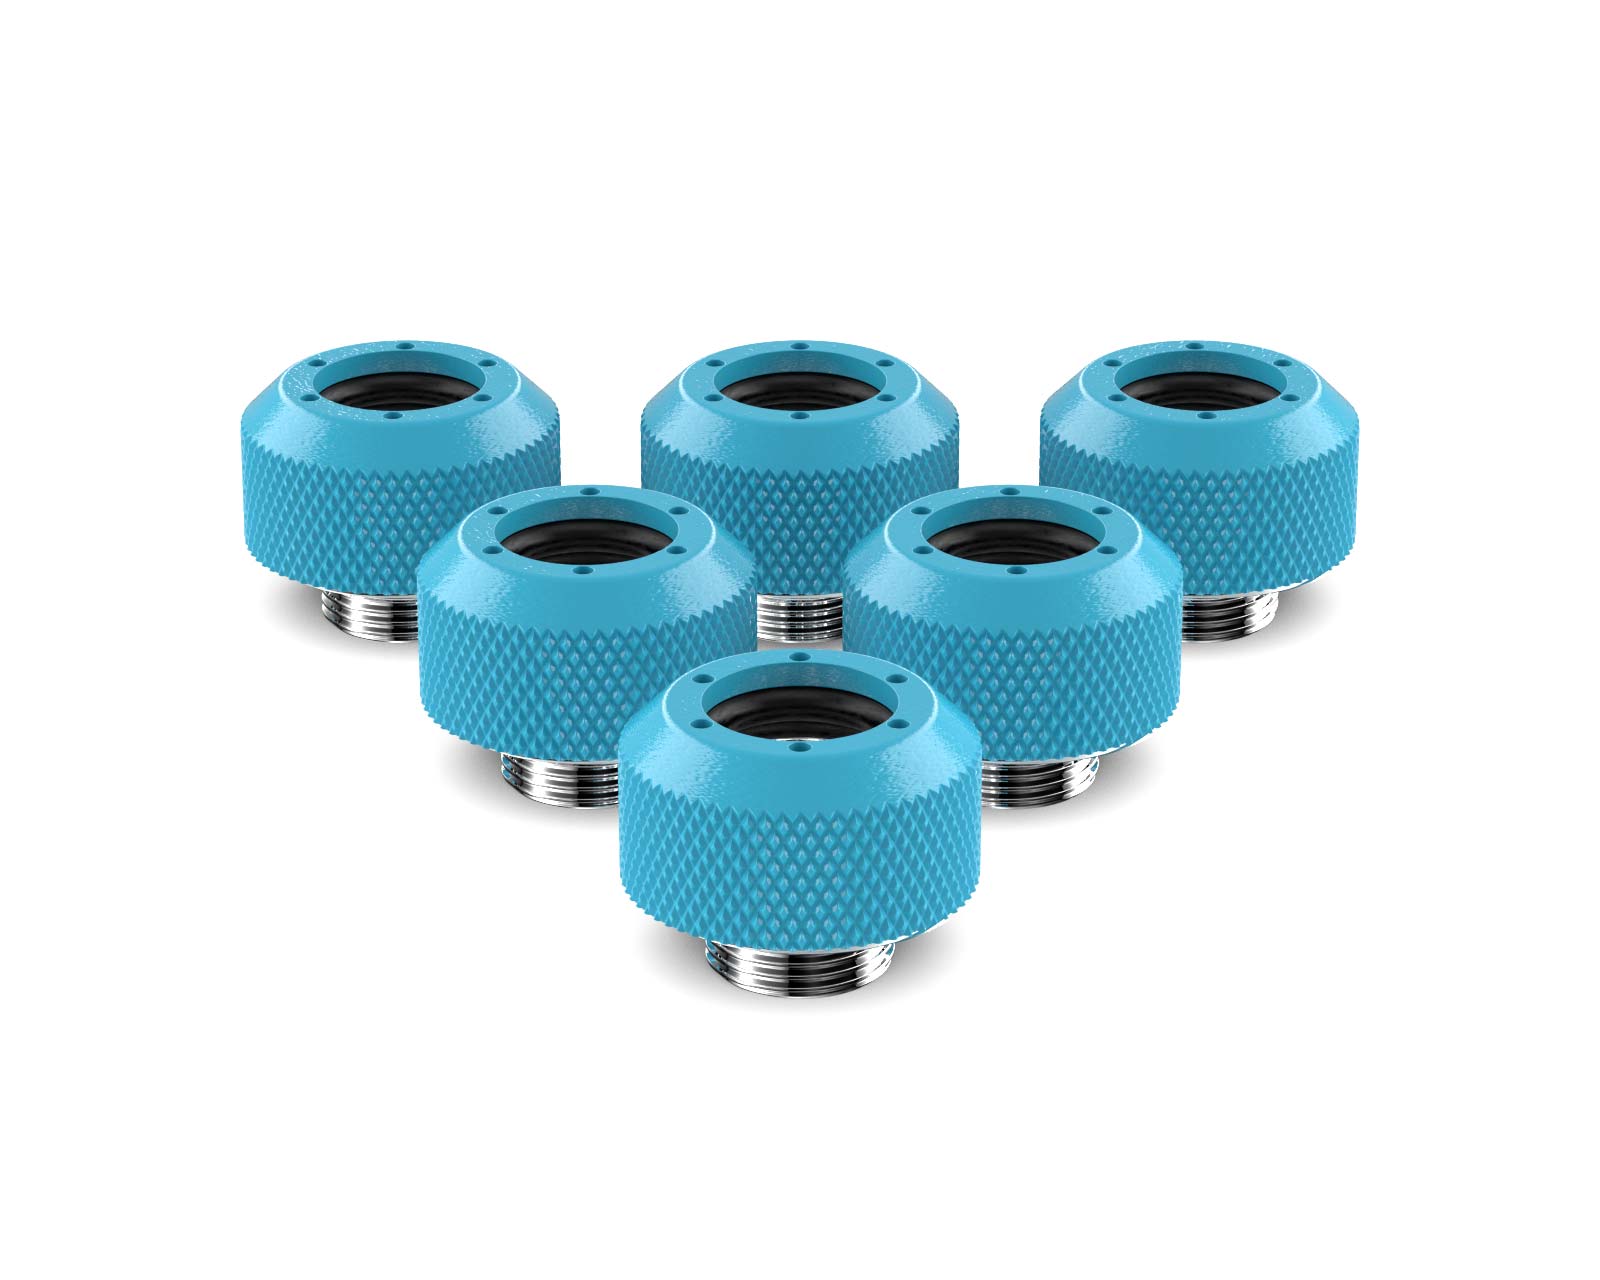 PrimoChill 1/2in. Rigid RevolverSX Series Fitting - 6 pack - PrimoChill - KEEPING IT COOL Sky Blue